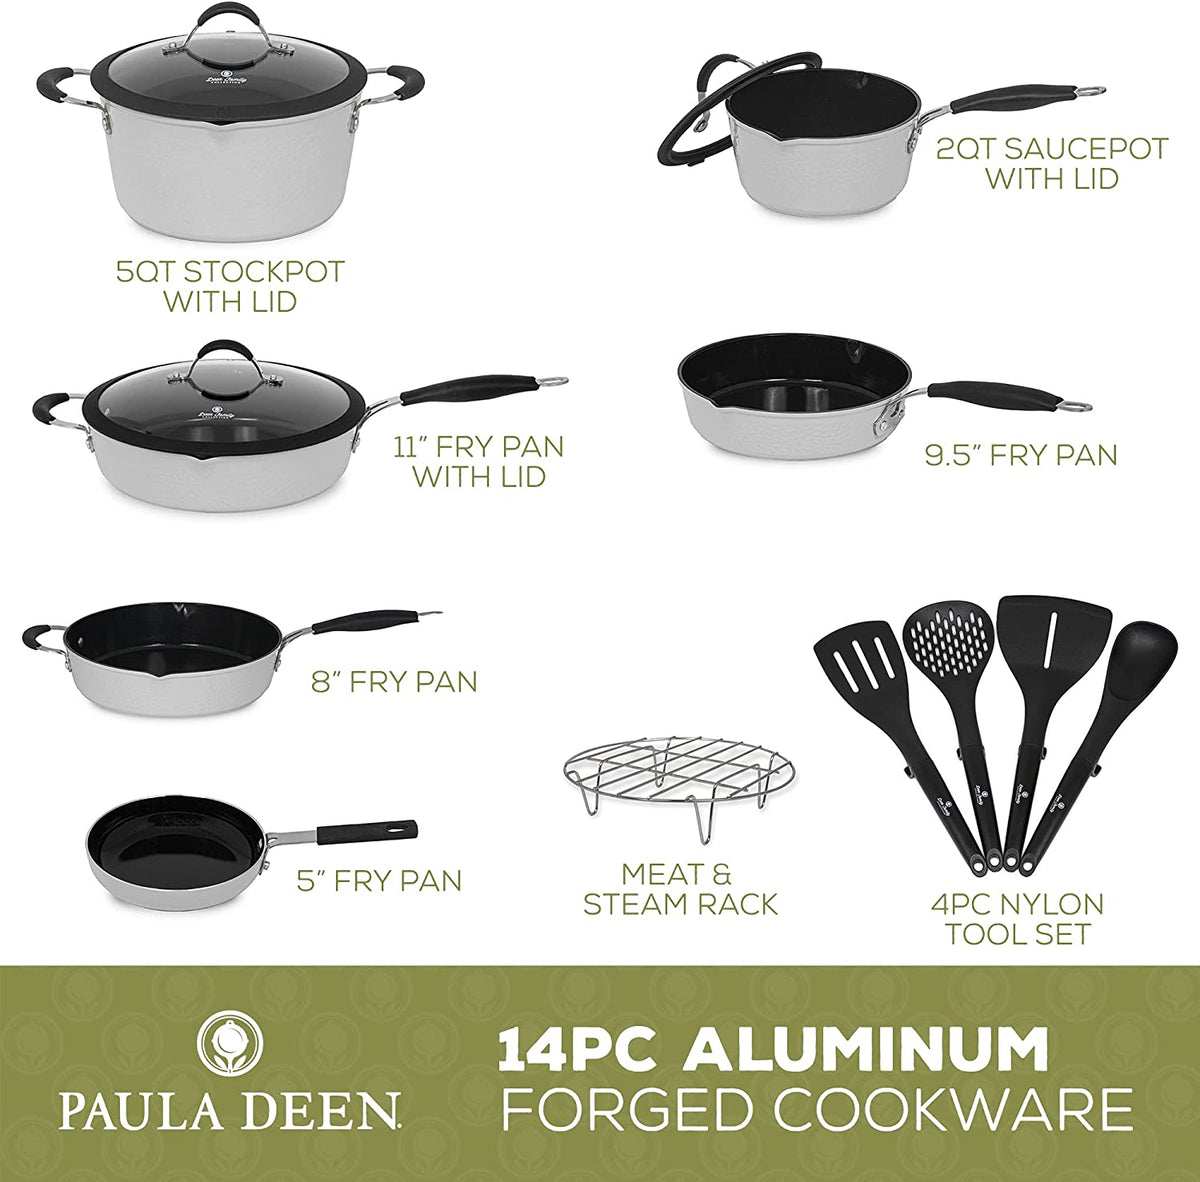 Paula Deen Family's New Hammered Aluminum Forged Silver 14pc